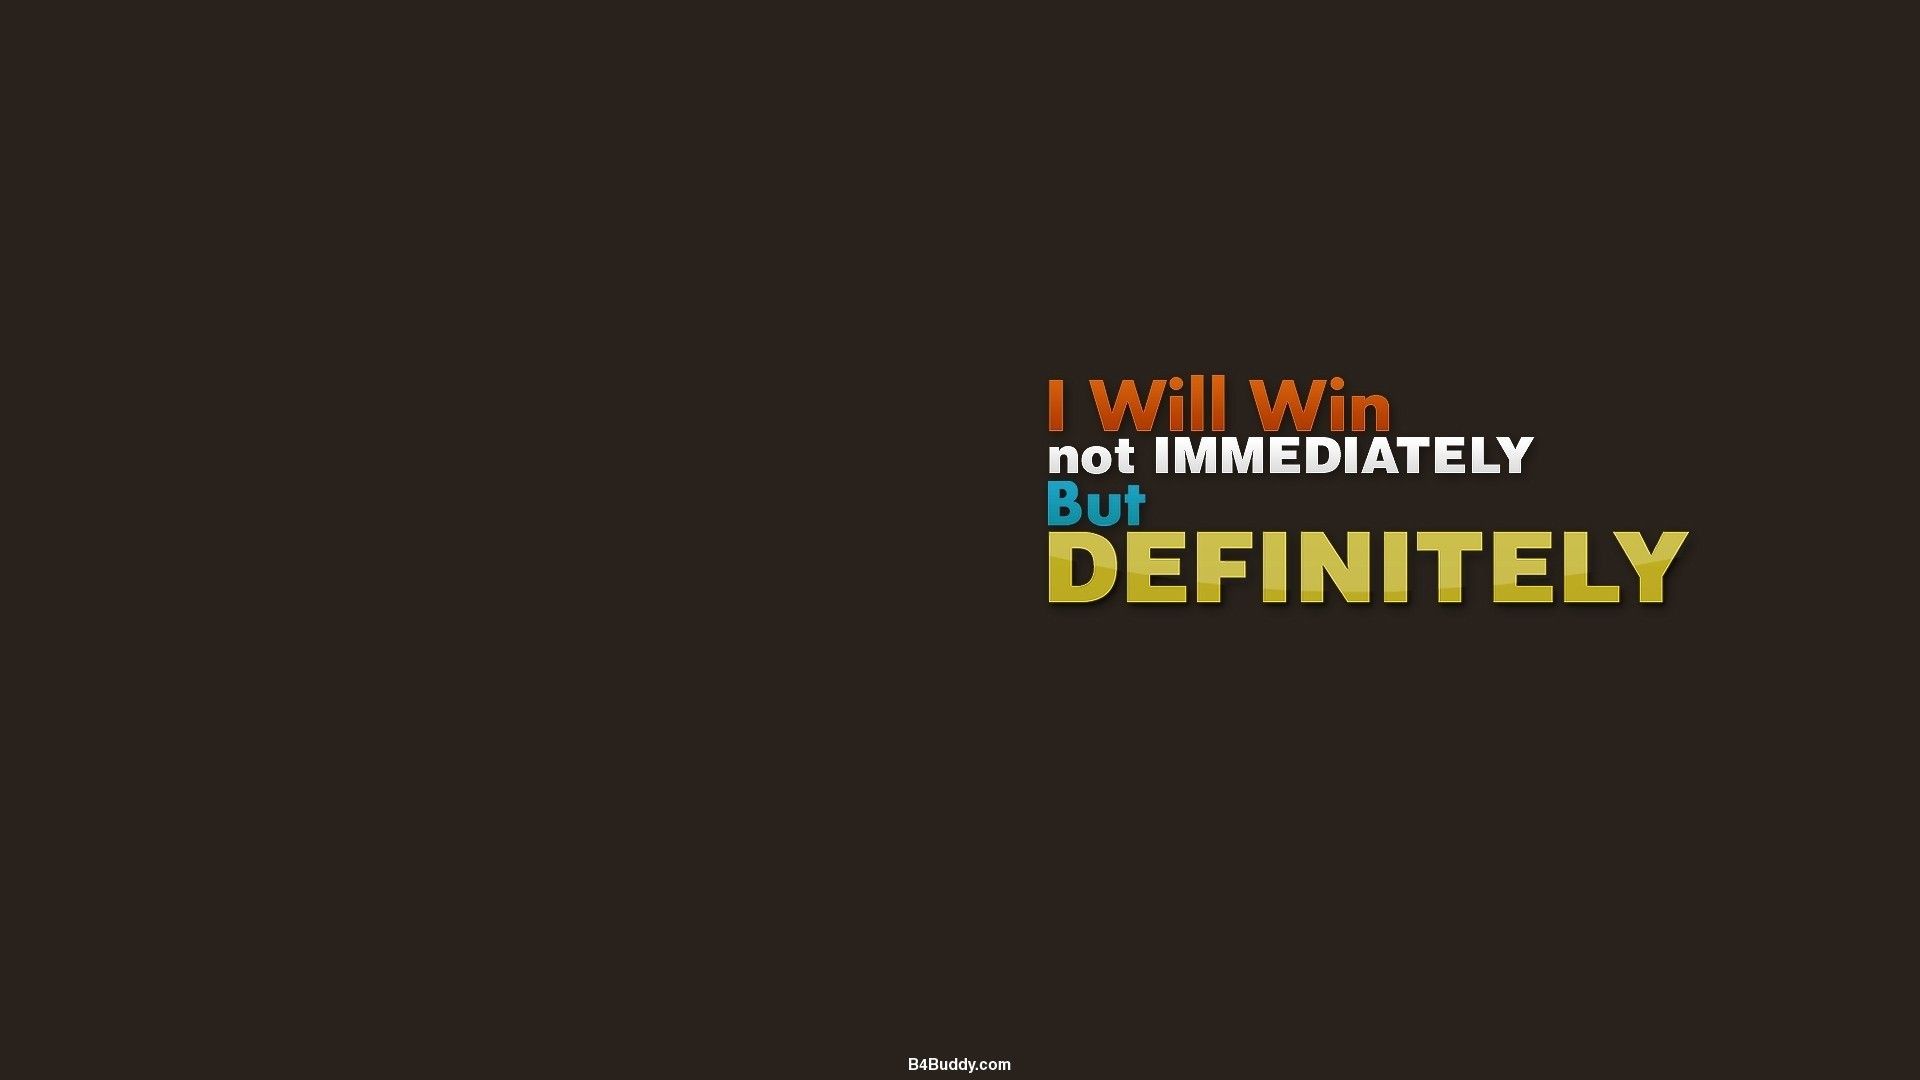 PC Quotes Wallpaper Free PC Quotes Background